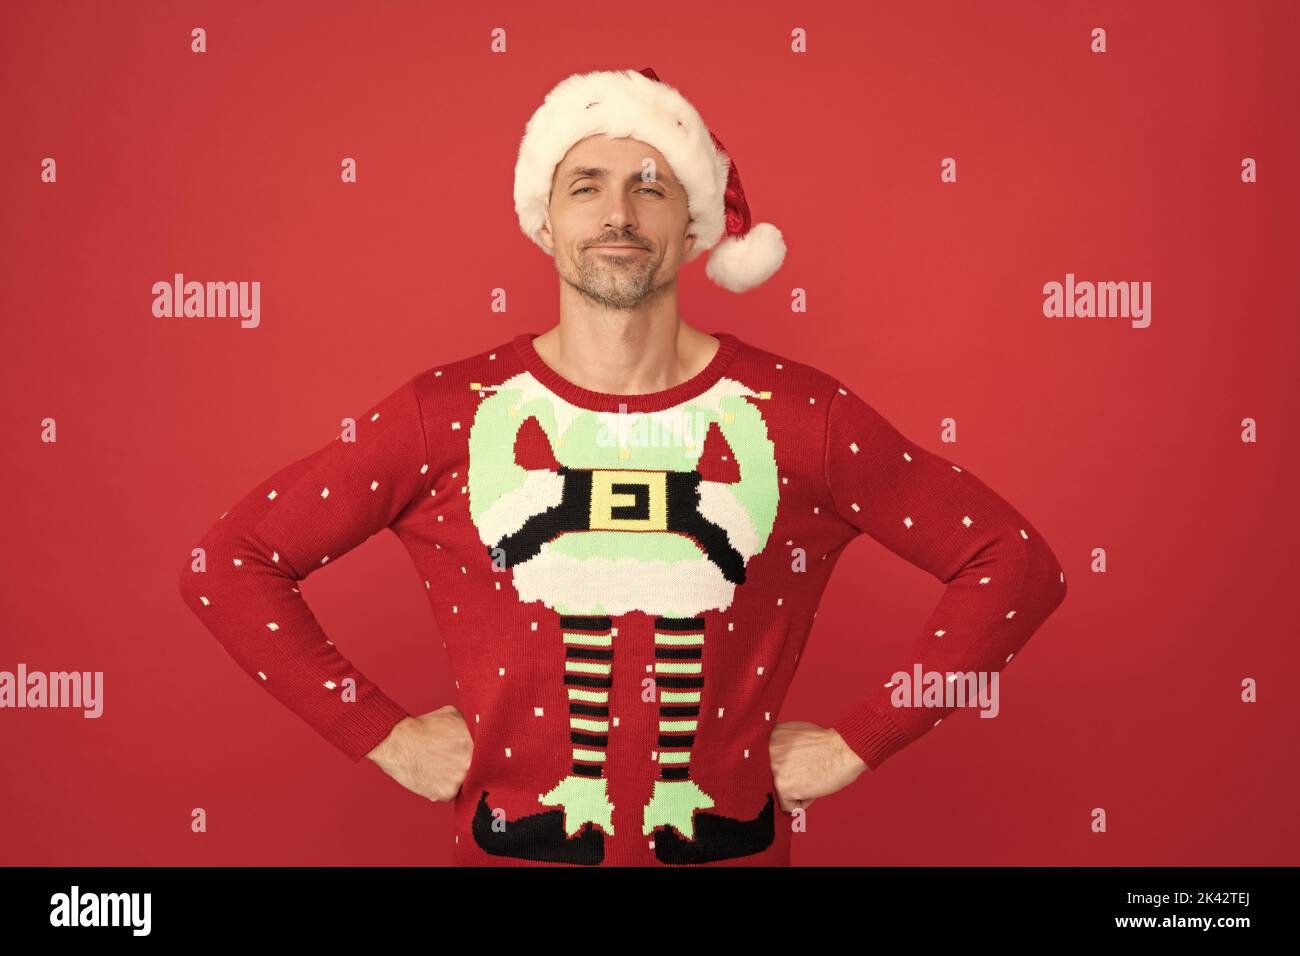 Santa Claus elf man in Christmas jumper stand confidently with arms akimbo red background, xmas Stock Photo